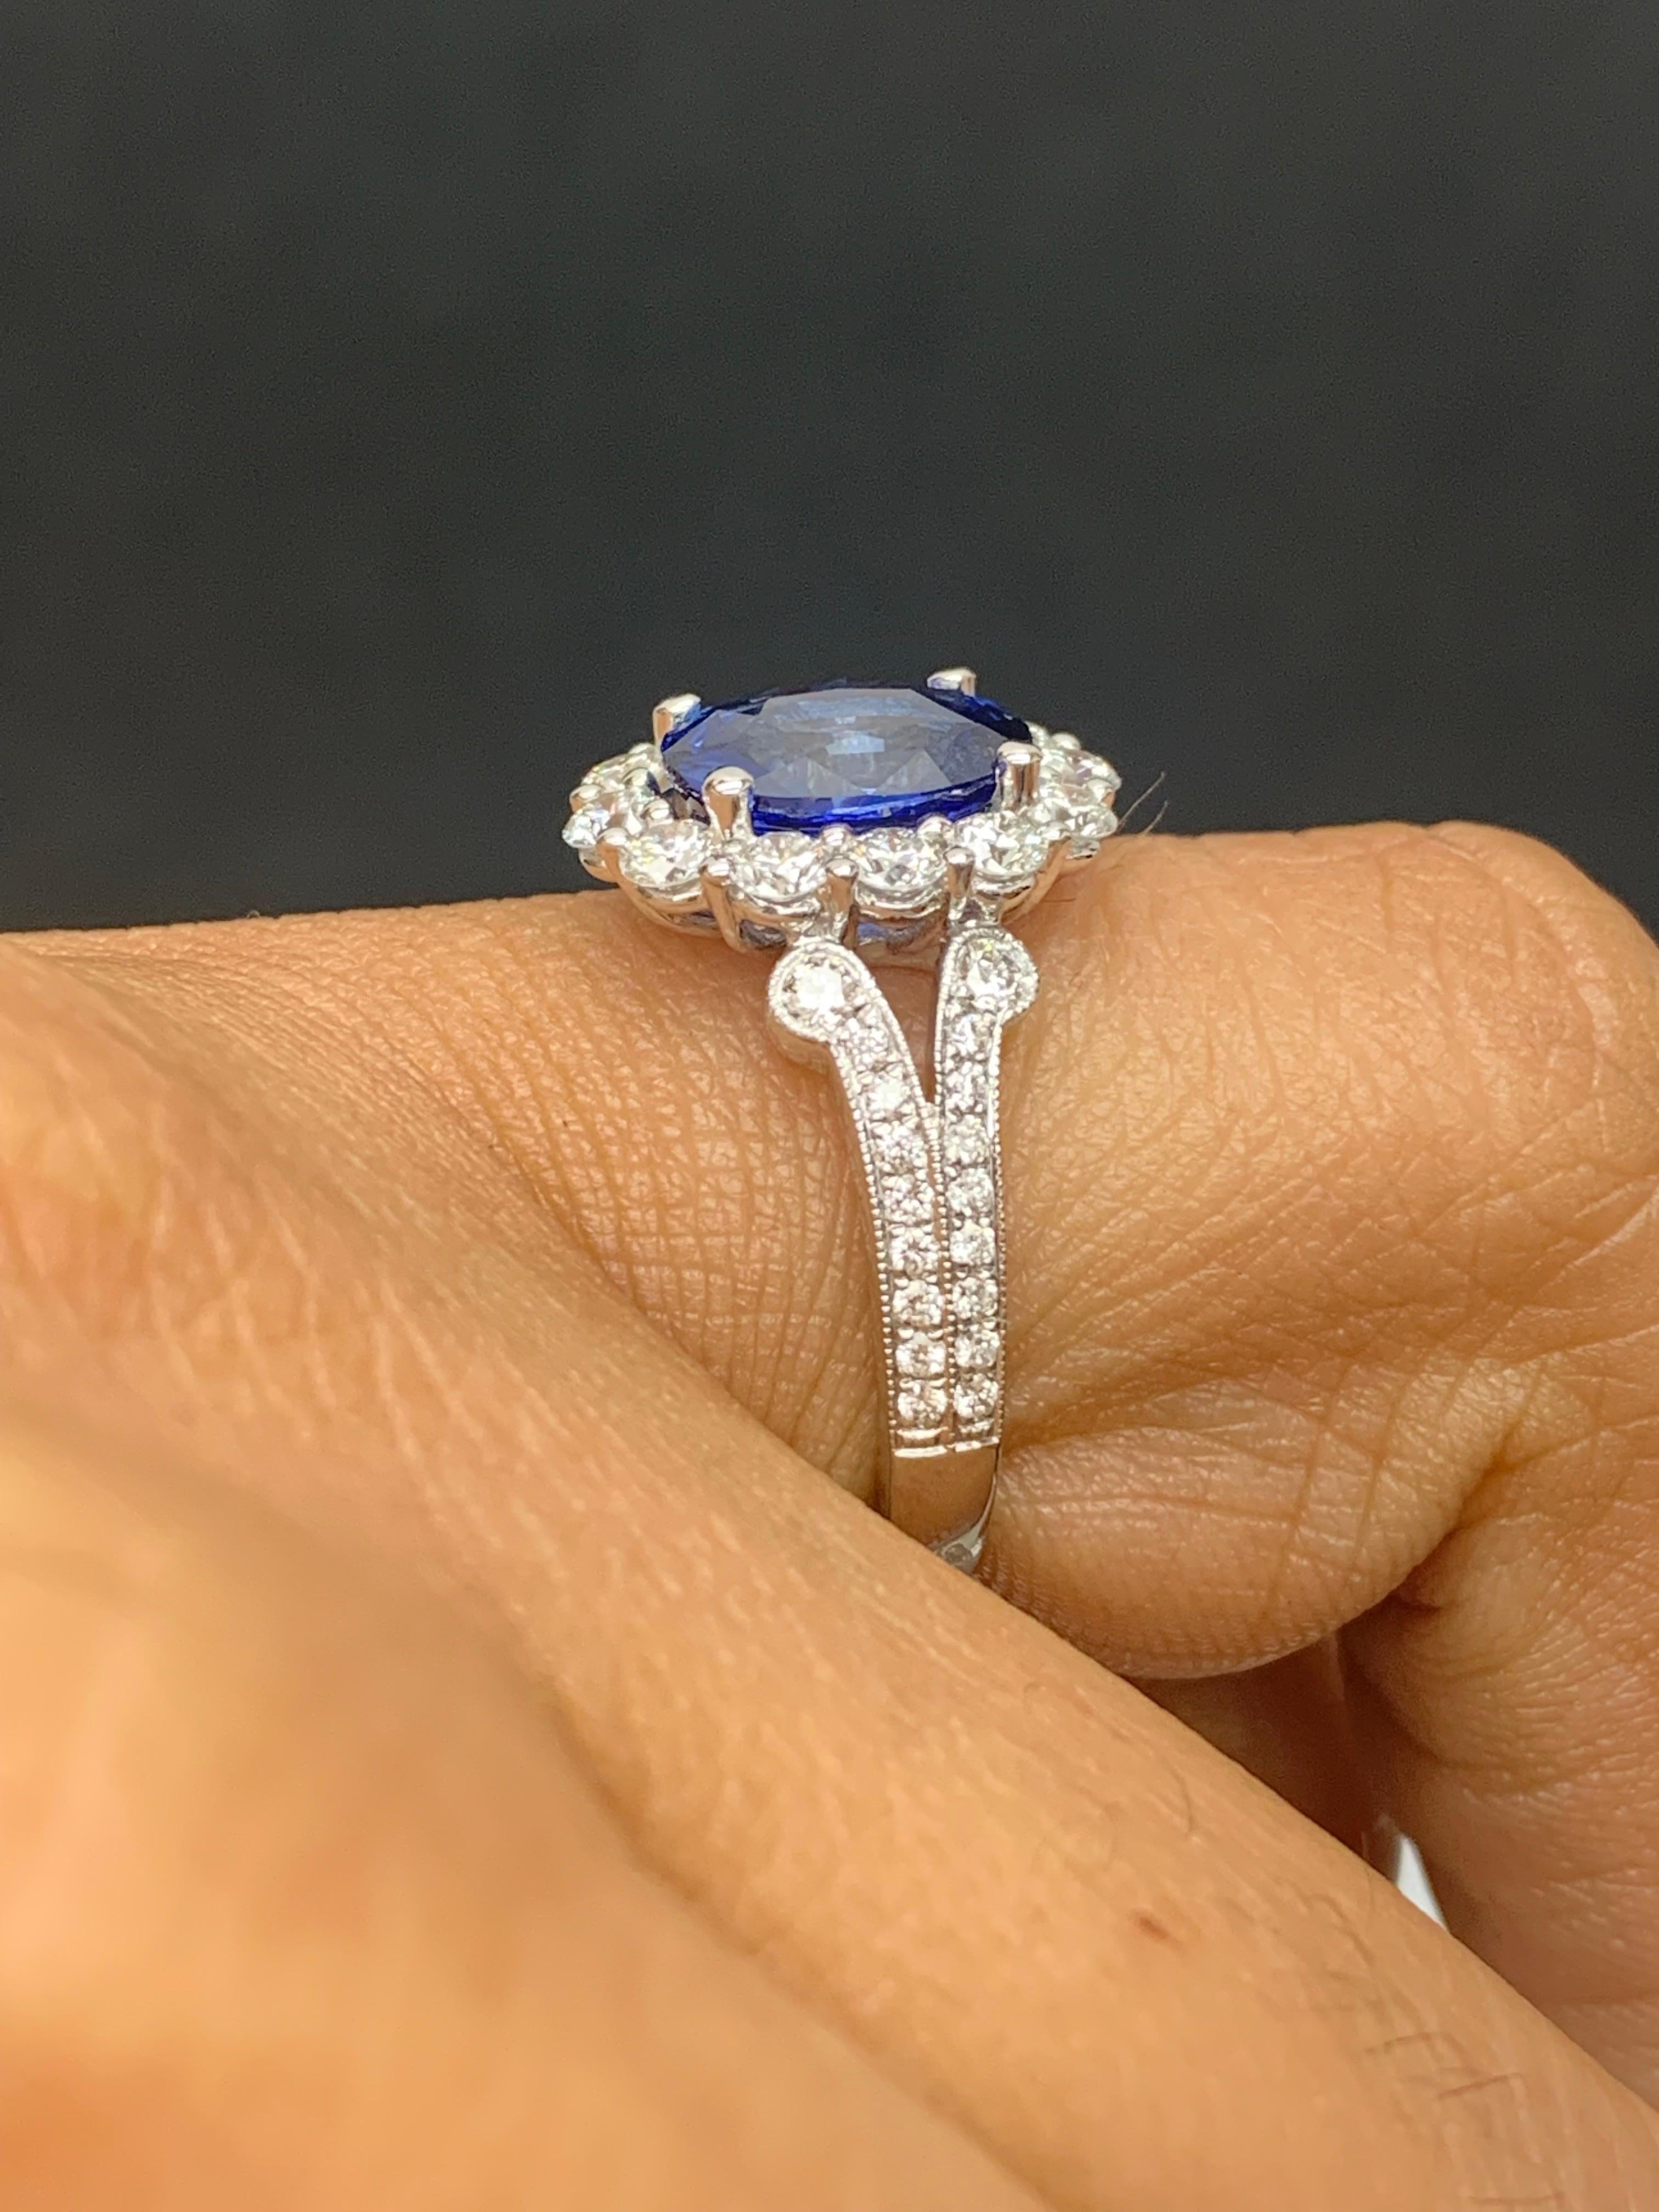 Women's 2.18 Carat Oval Cut Sapphire and Diamond Ring in 18k White Gold For Sale